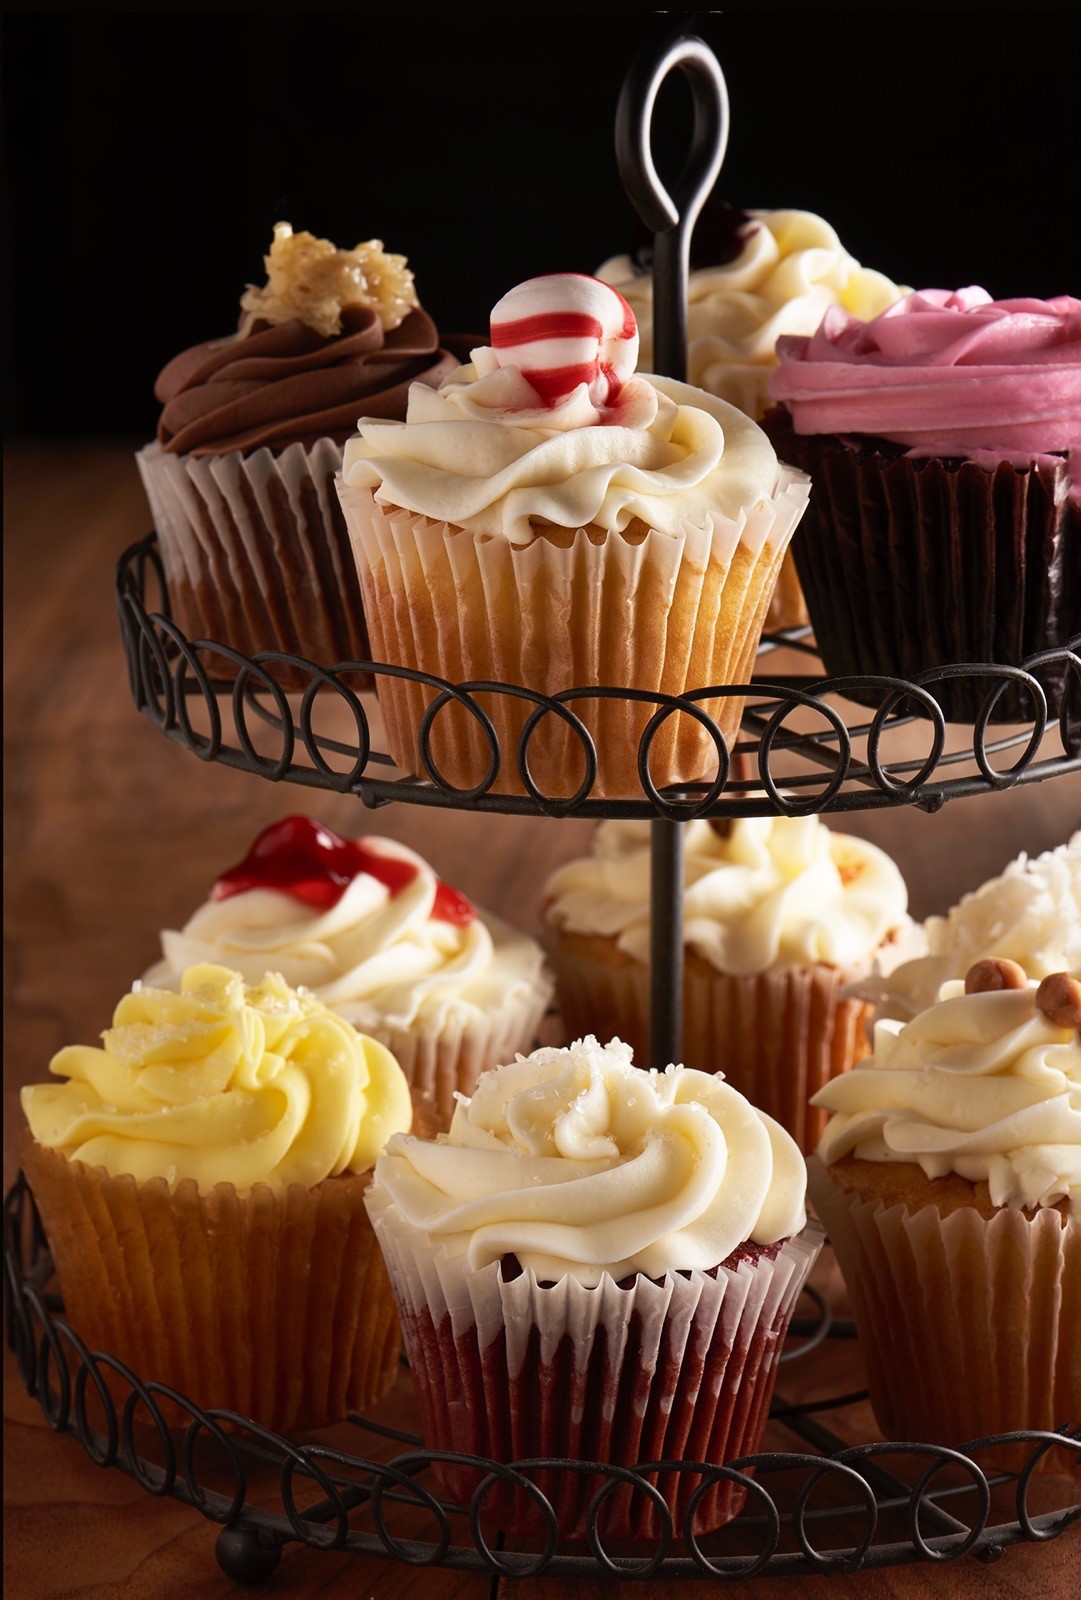 Henny Penny Cupcakes Coupons near me in Havre, MT 59501 | 8coupons